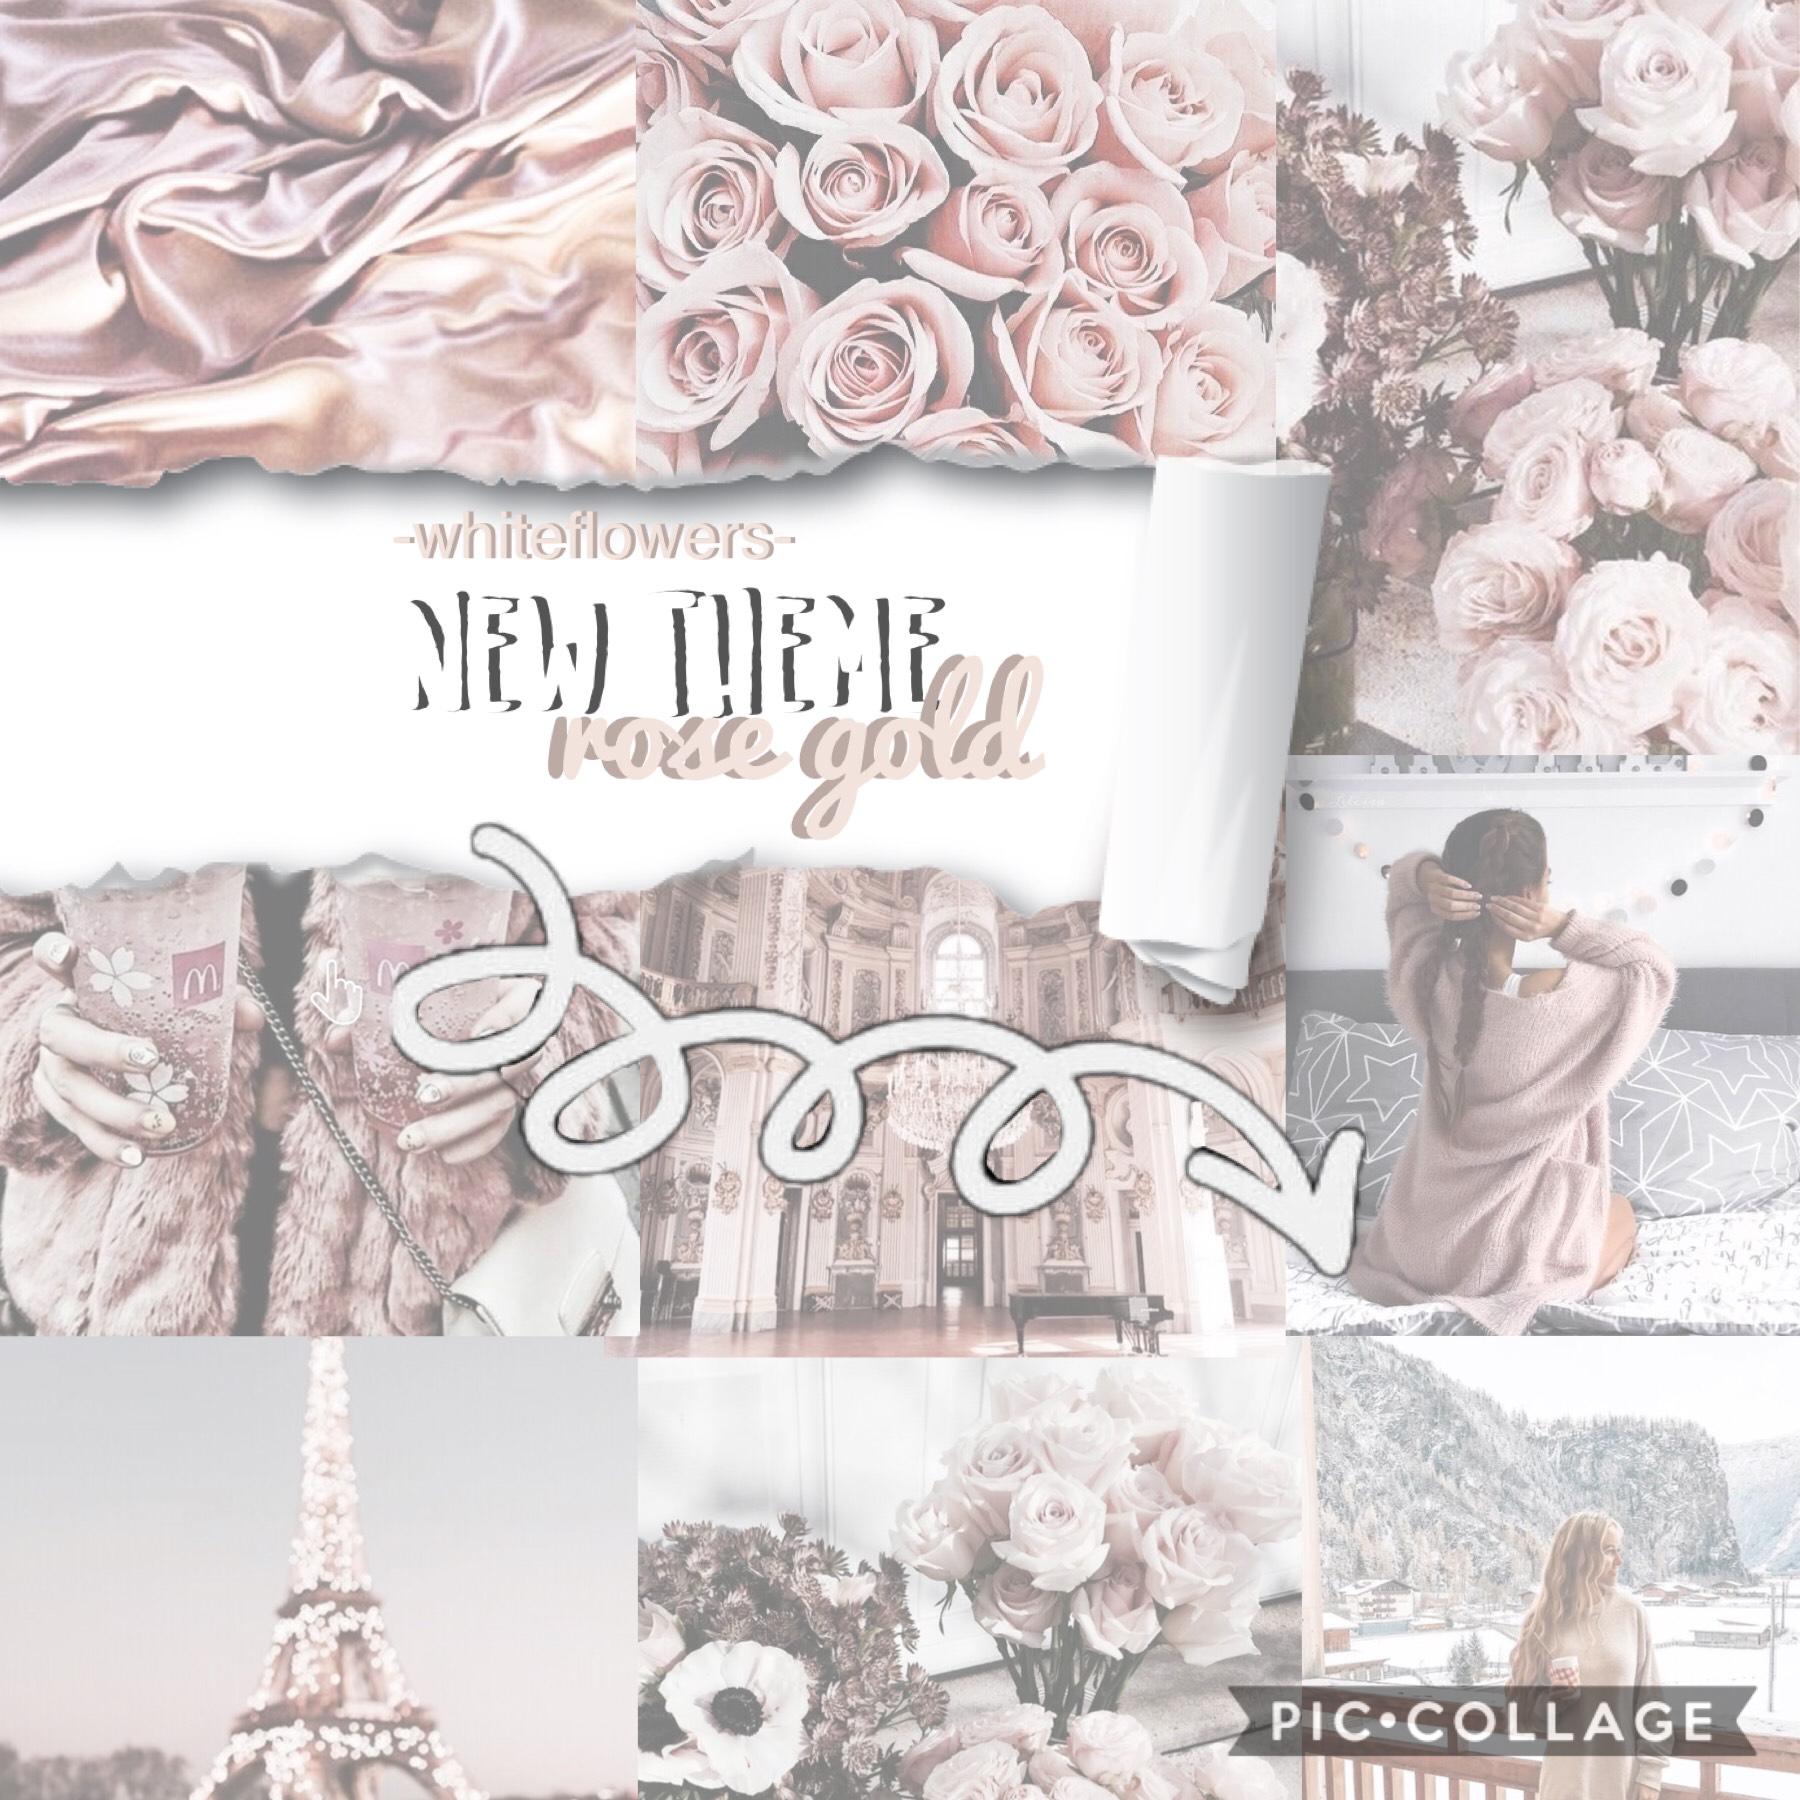 New year, new theme. tap!💓🦋😊
*hope you like the idea of this new theme, my account was getting a little messy so I thought I’d try and tidy it up! Comment what you think!
*also make sure to enter my icon contest on my extra account -whiteflowers-extra it 